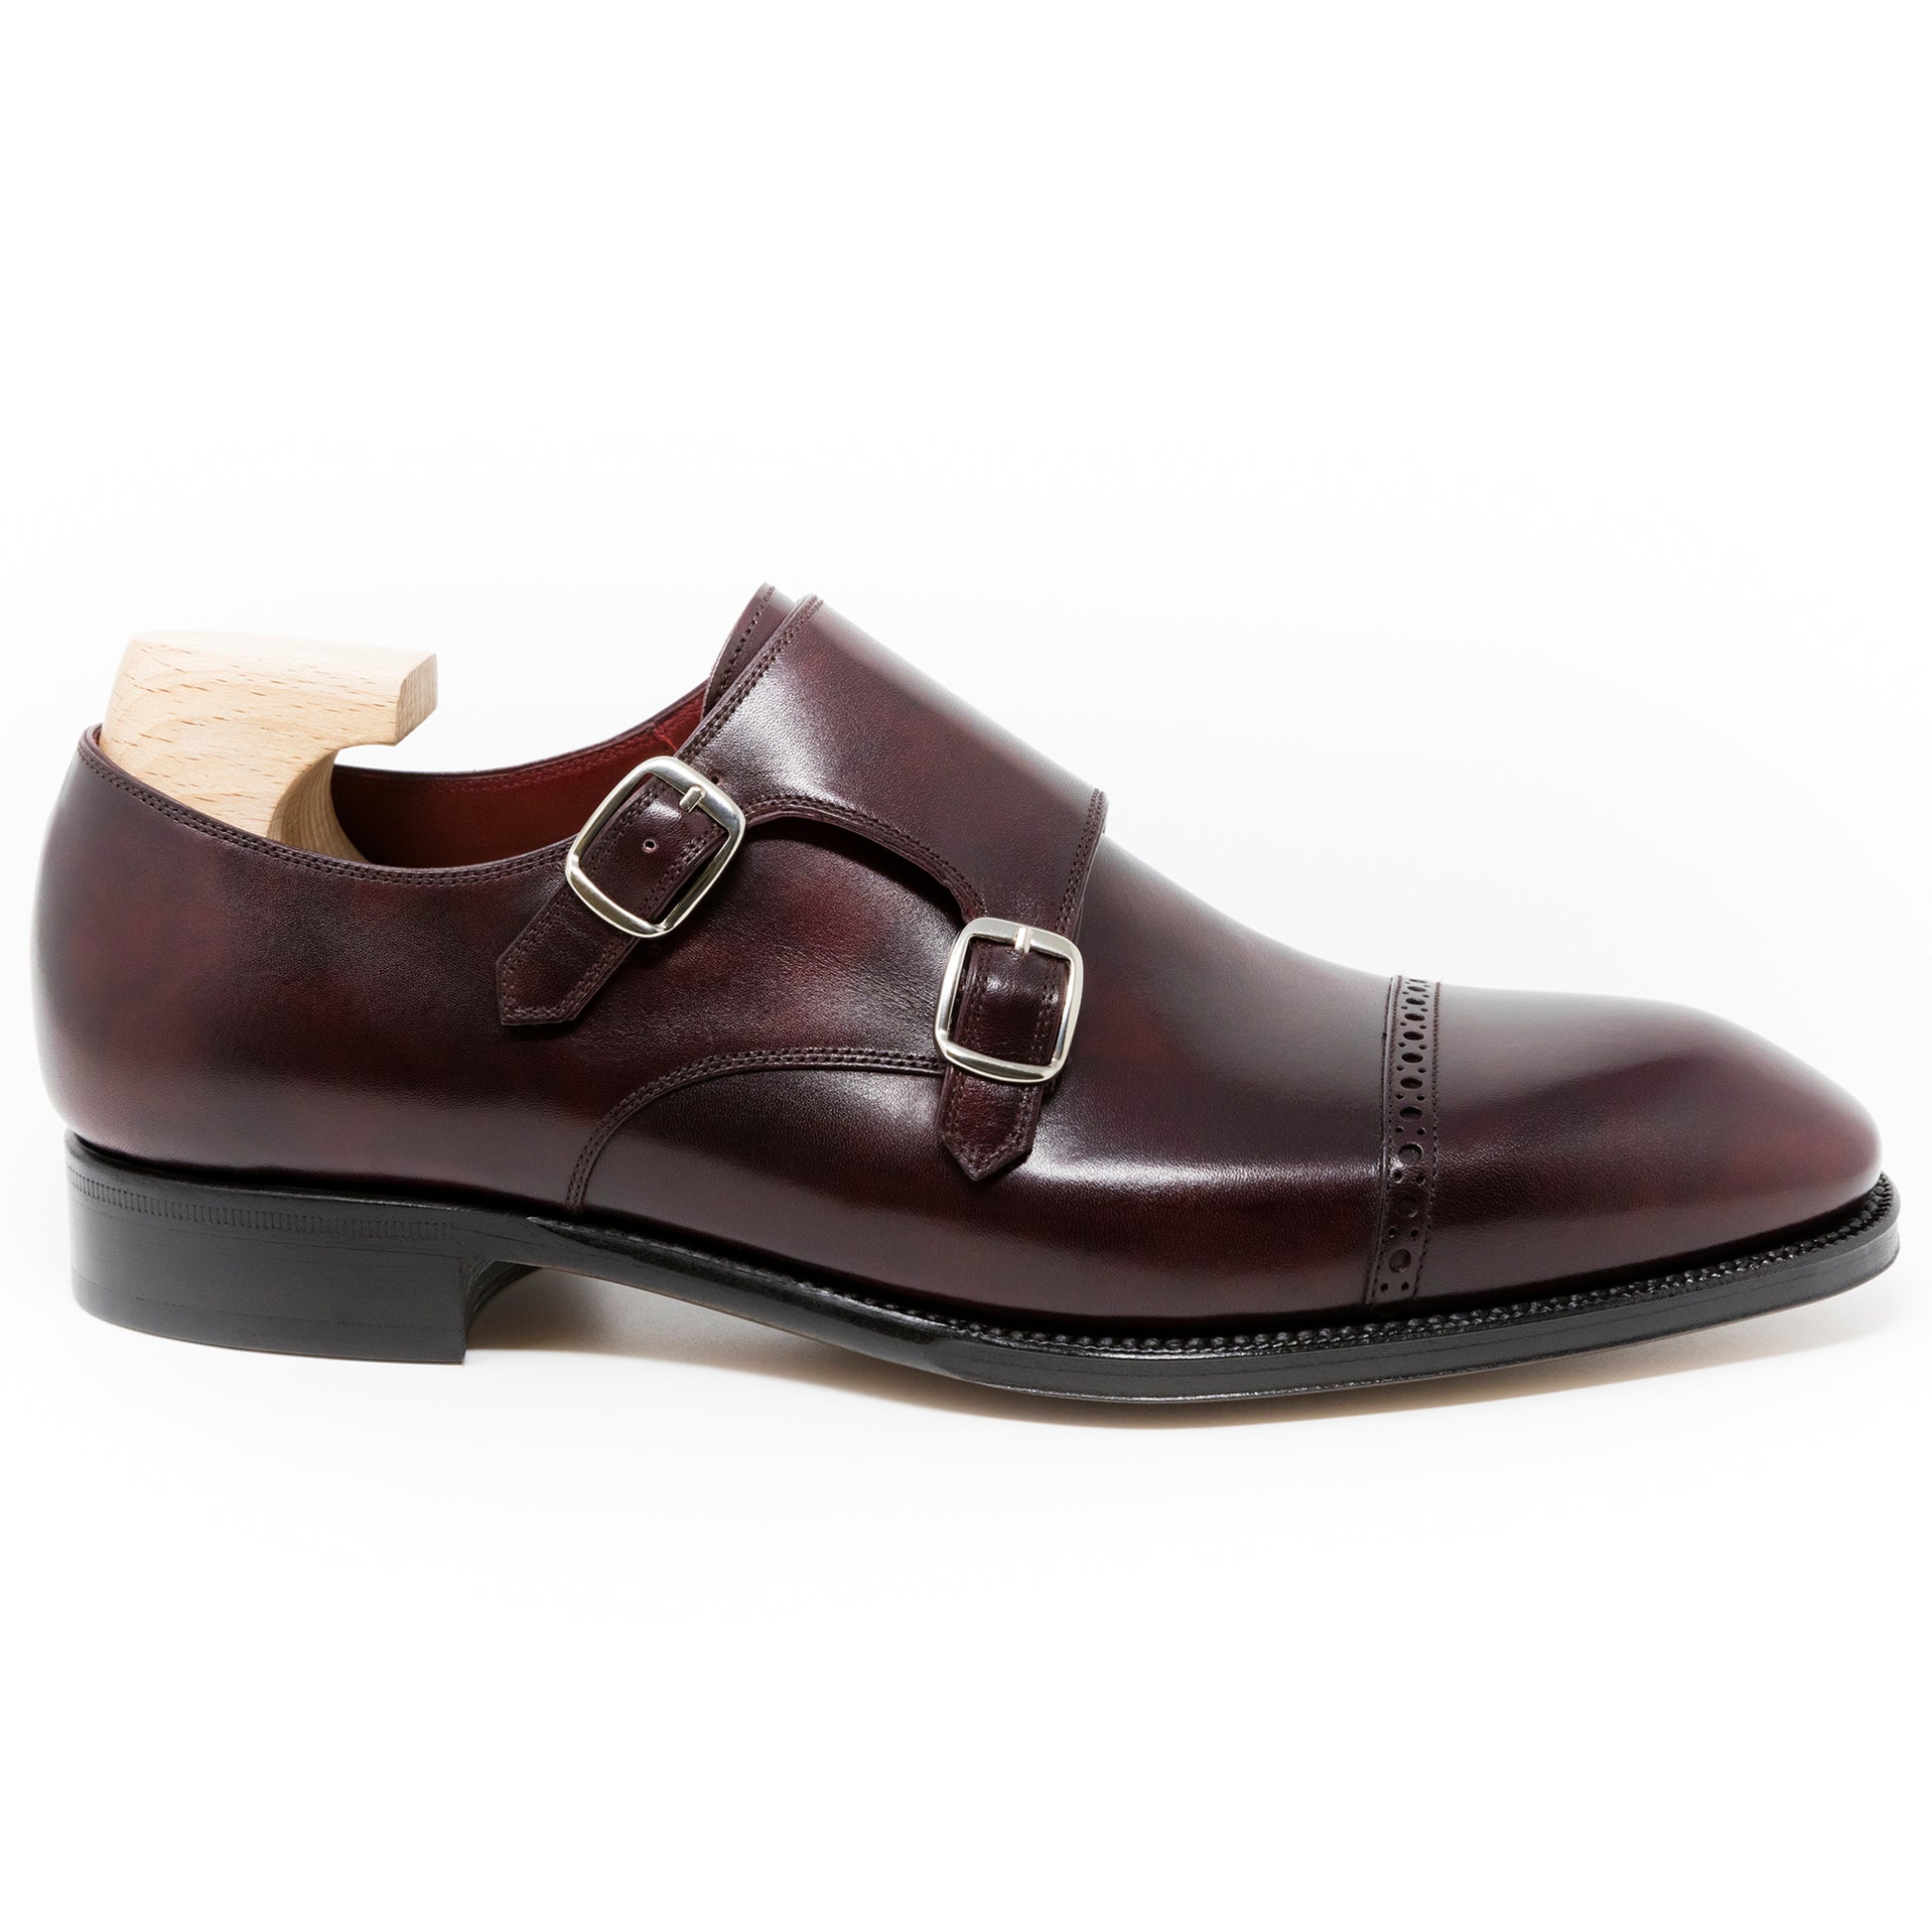 TLB Mallorca leather shoes 544 / ALAN / MUSEUM CALF BURGUNDY